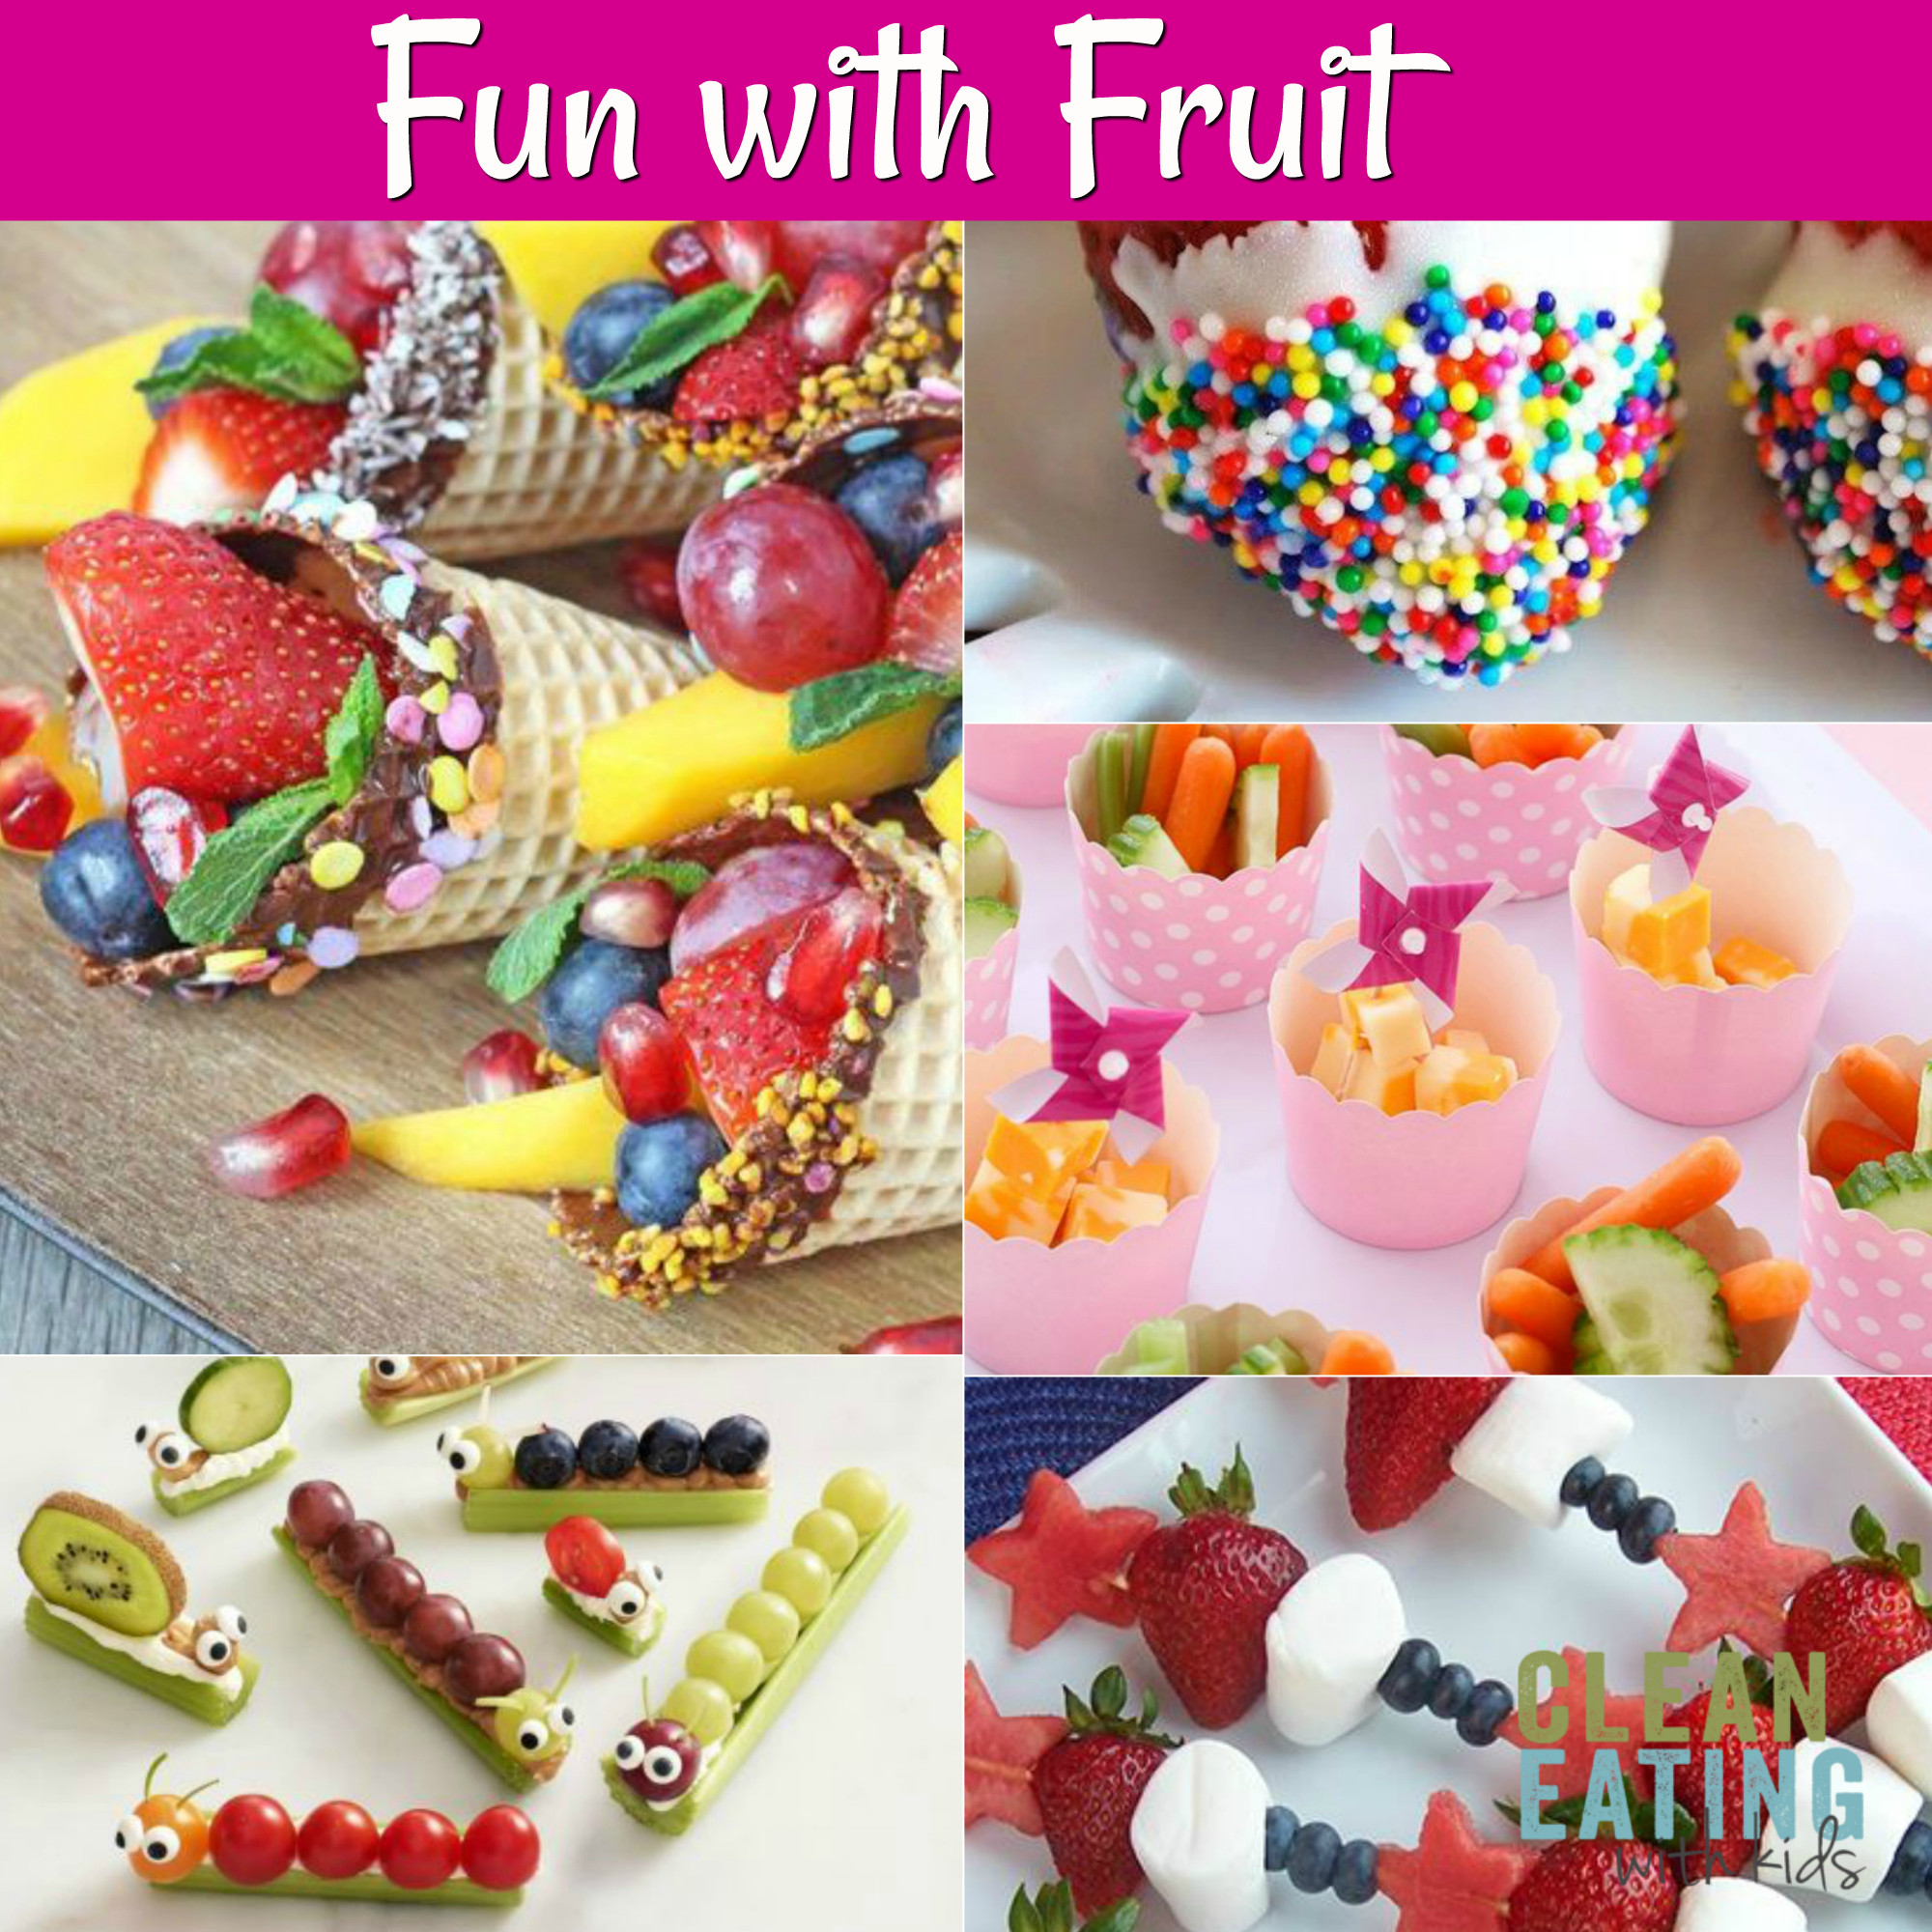 Birthday Party Food Ideas
 25 Healthy Birthday Party Food Ideas Clean Eating with kids